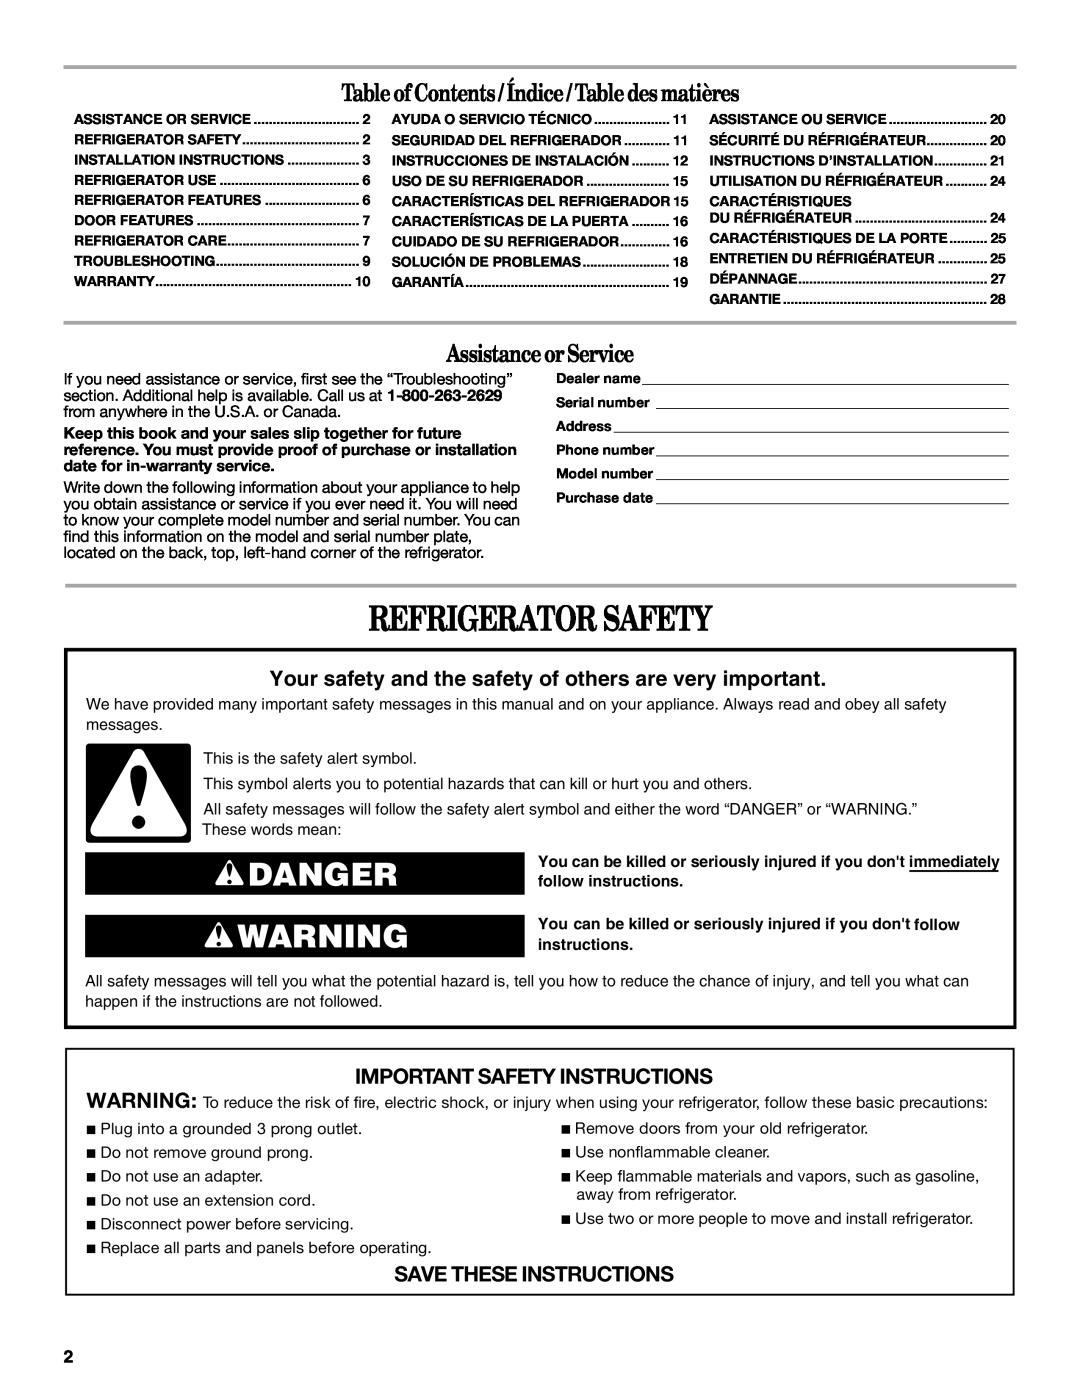 Whirlpool WAR449W manual Refrigerator Safety, Danger, Table of Contents/ Índice/ Table des matières, Assistance or Service 